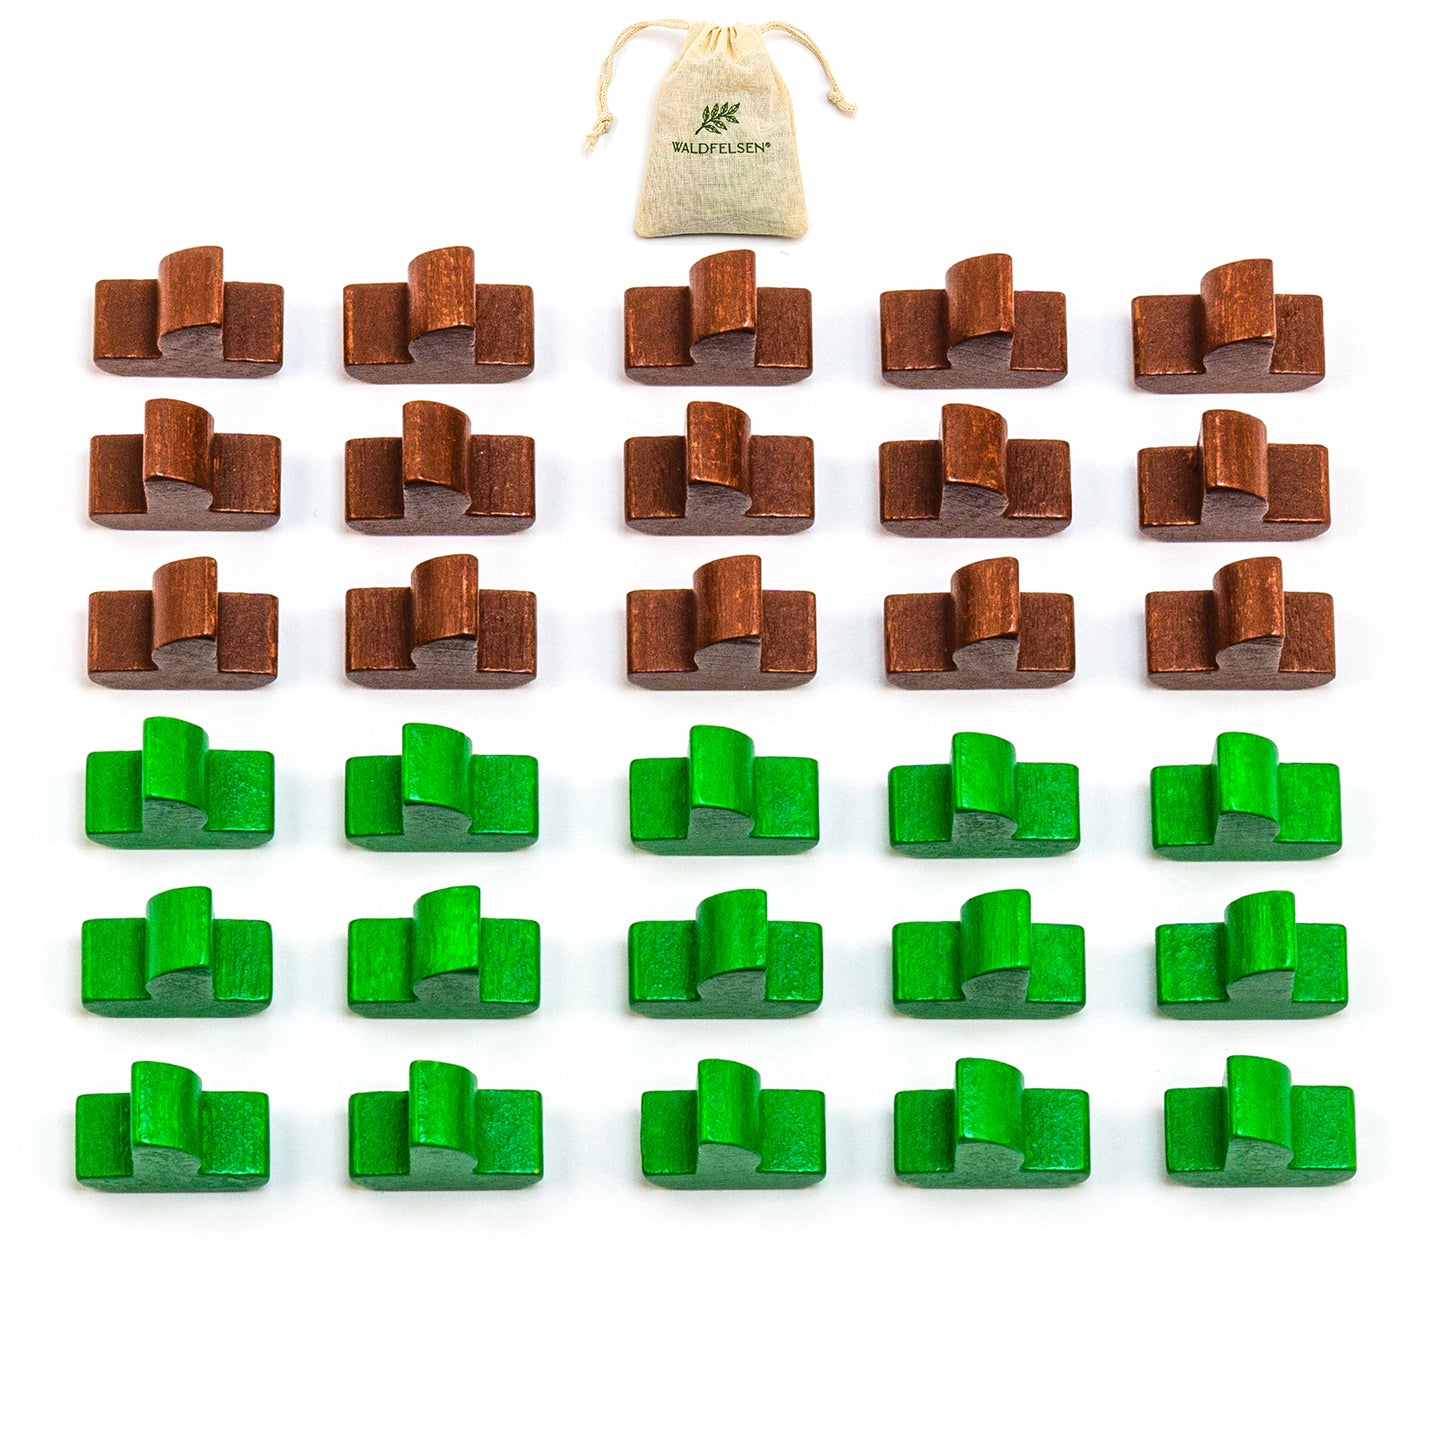 Settlers wooden figures - sets for 2 players